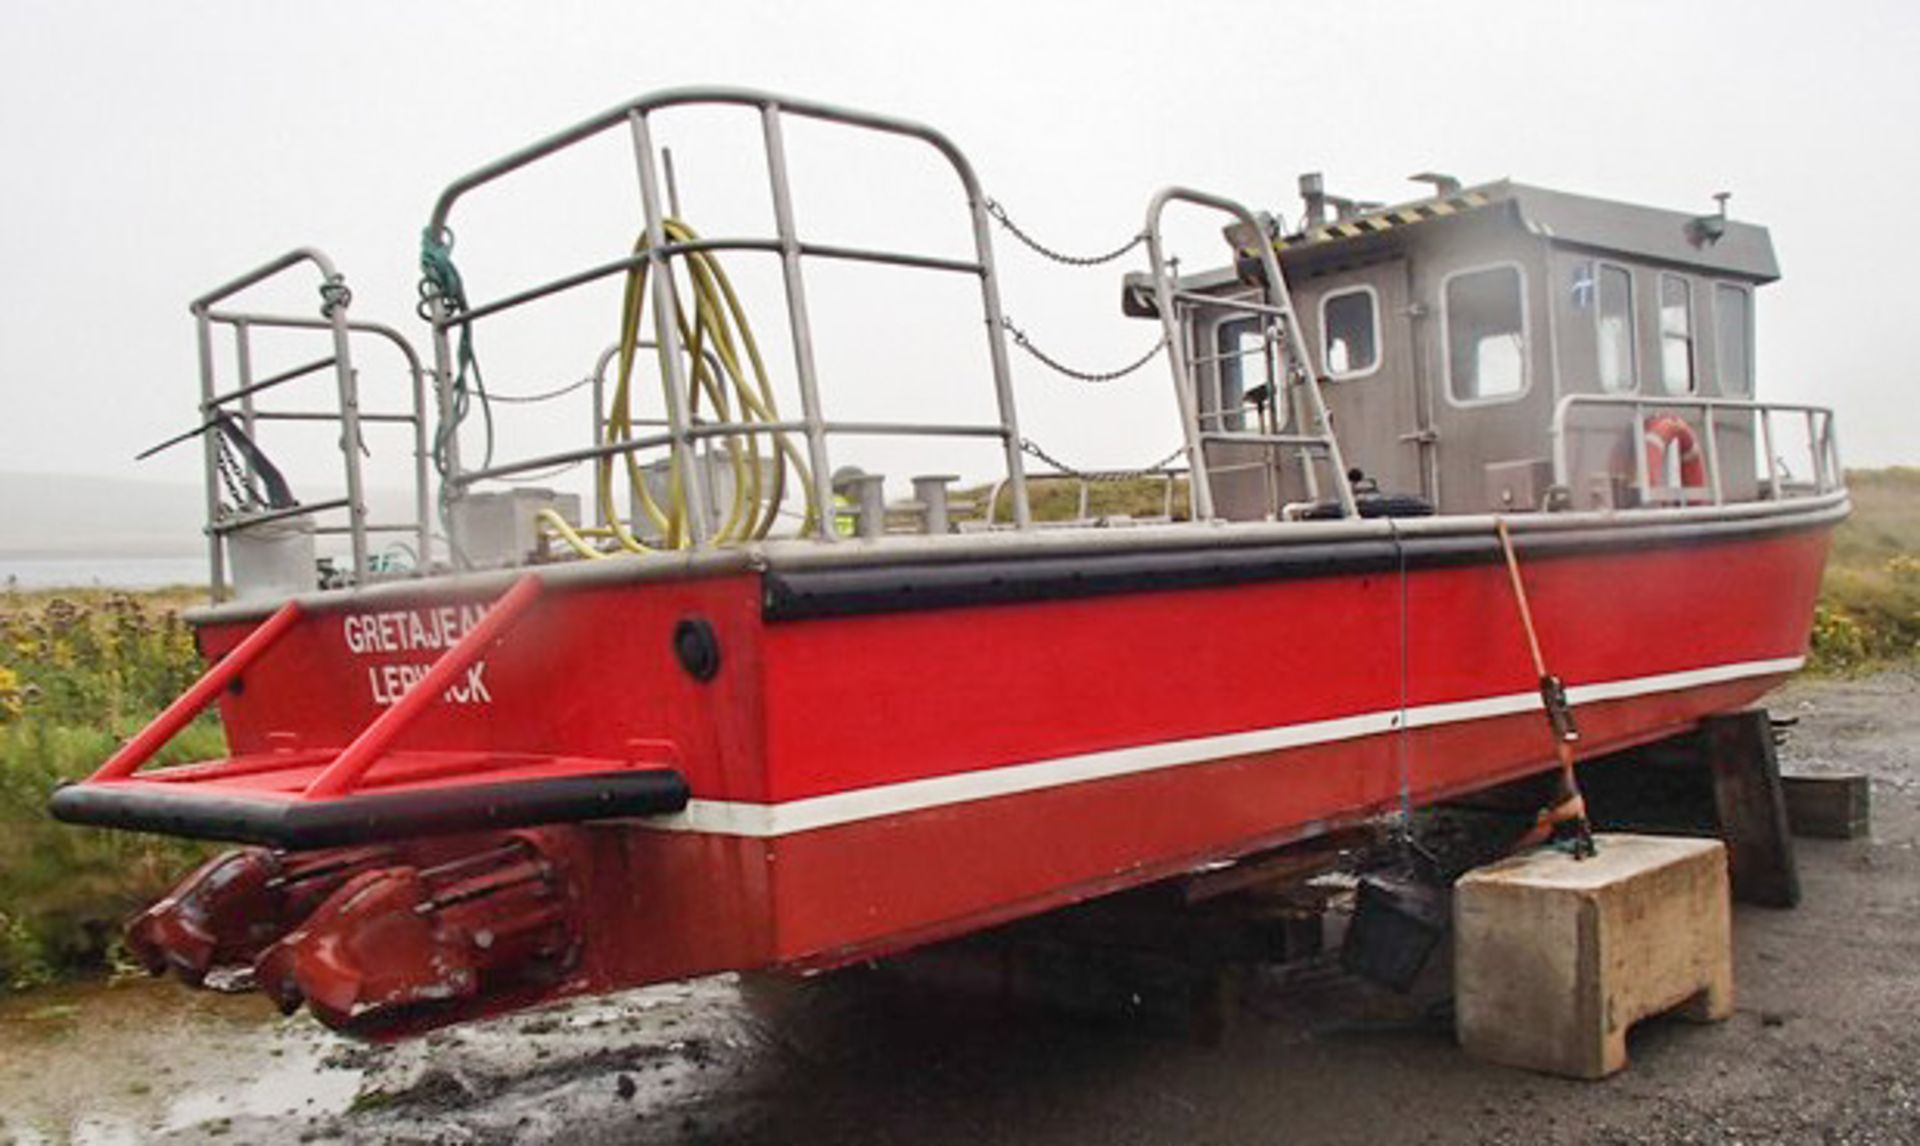 2013 30FT ALUMINIUM VOE BOAT BUILT BY MALAKOFF IN LERWICK. SPECIFICALLY DESIGNED FOR INSHORE SURVEY - Image 4 of 20